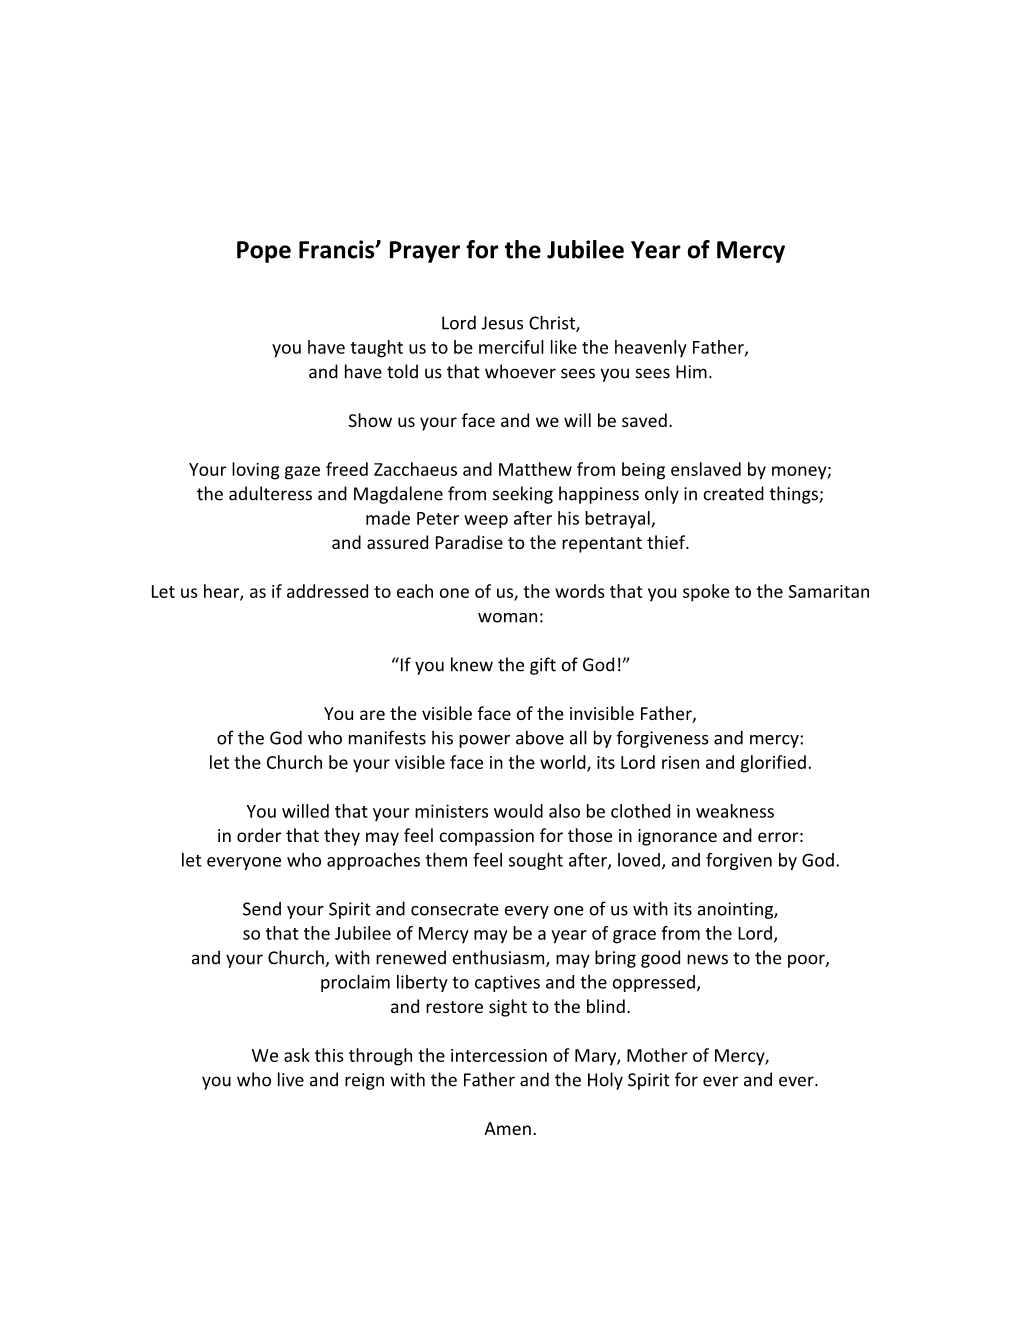 Pope Francis Prayer for the Jubilee Year of Mercy